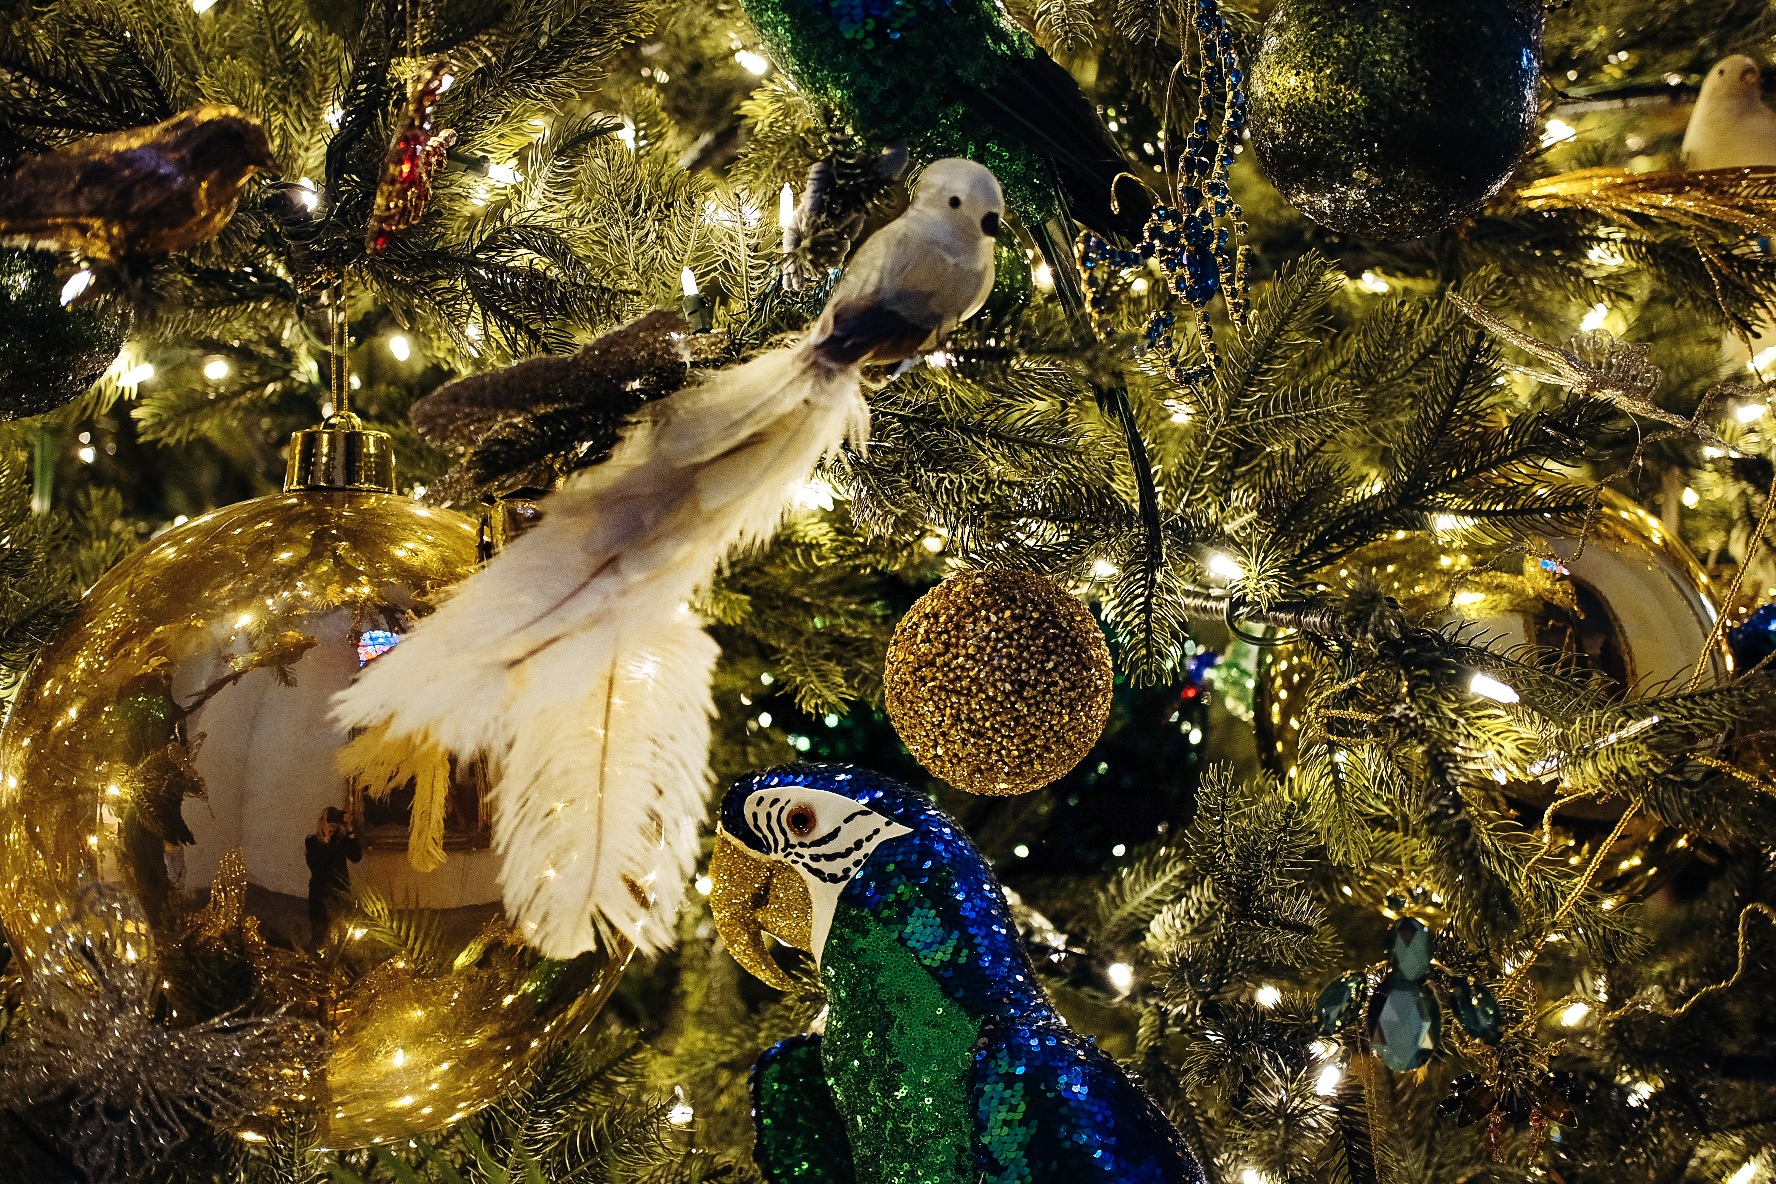 Sparkling birds and other Paradise-themed Christmas decorations by Shishi in the St Nicholas (Niguliste) Church in Tallinn, Estonia 